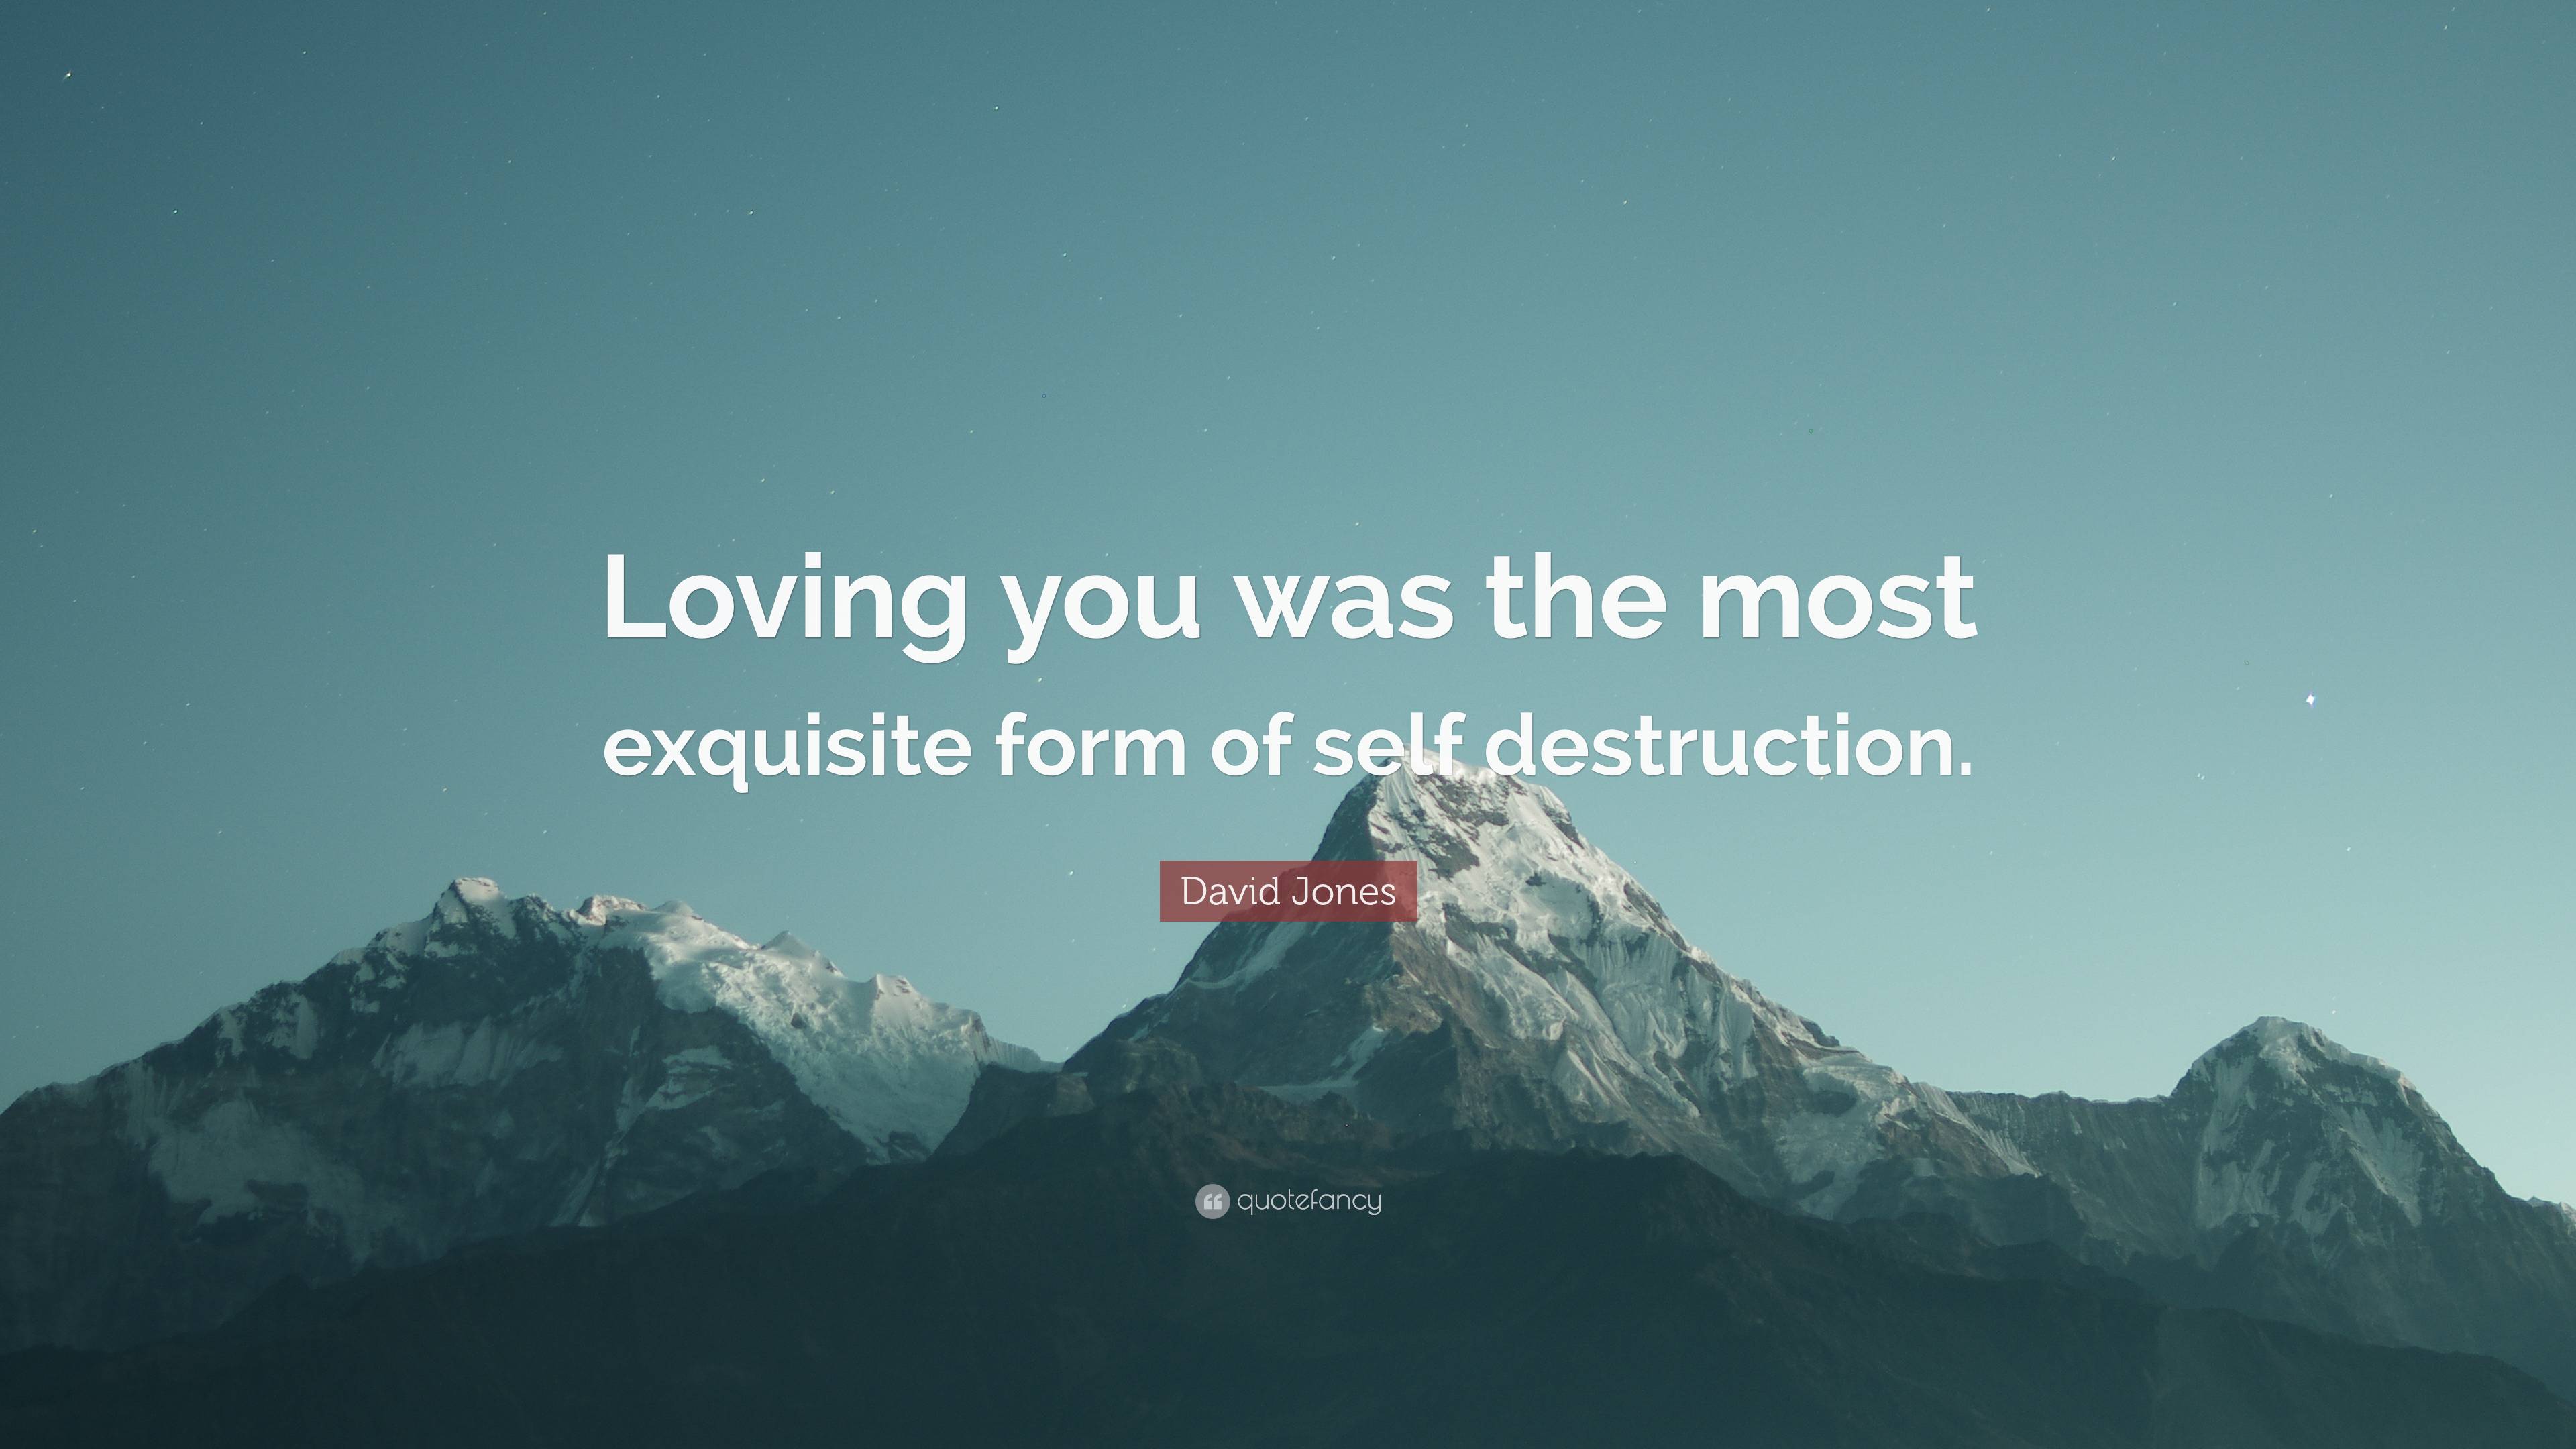 David Jones Quote: “Loving you was the most exquisite form of self  destruction.”